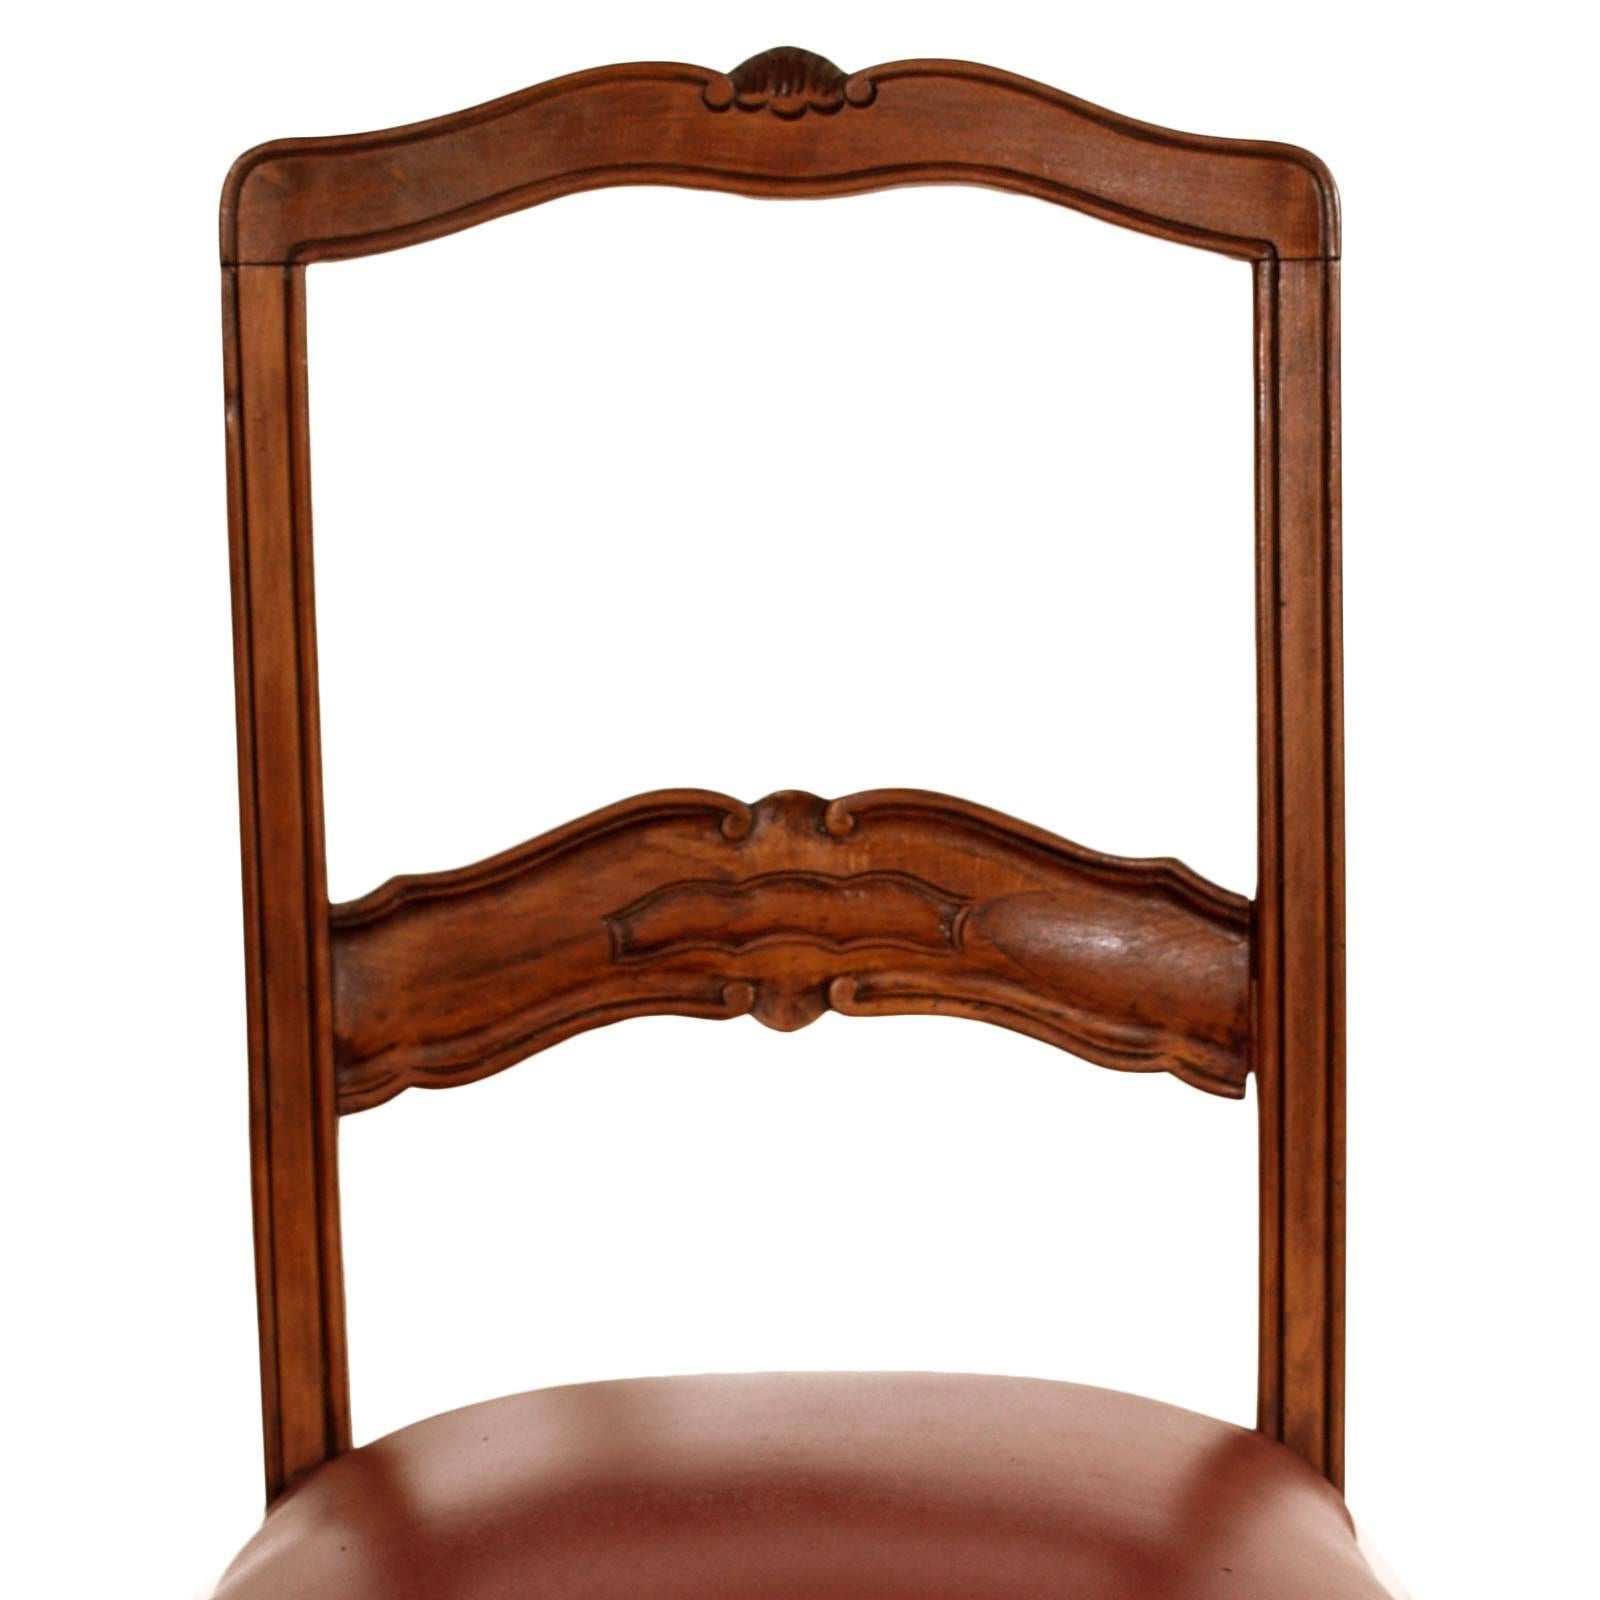 1990s, elegant chairs restored and polished to wax, finely hand-carved walnut, seat in original leather in good condition with straps and springs.
Suitable for writing table or for entry or bedroom. Simple and elegant in shape with a charming